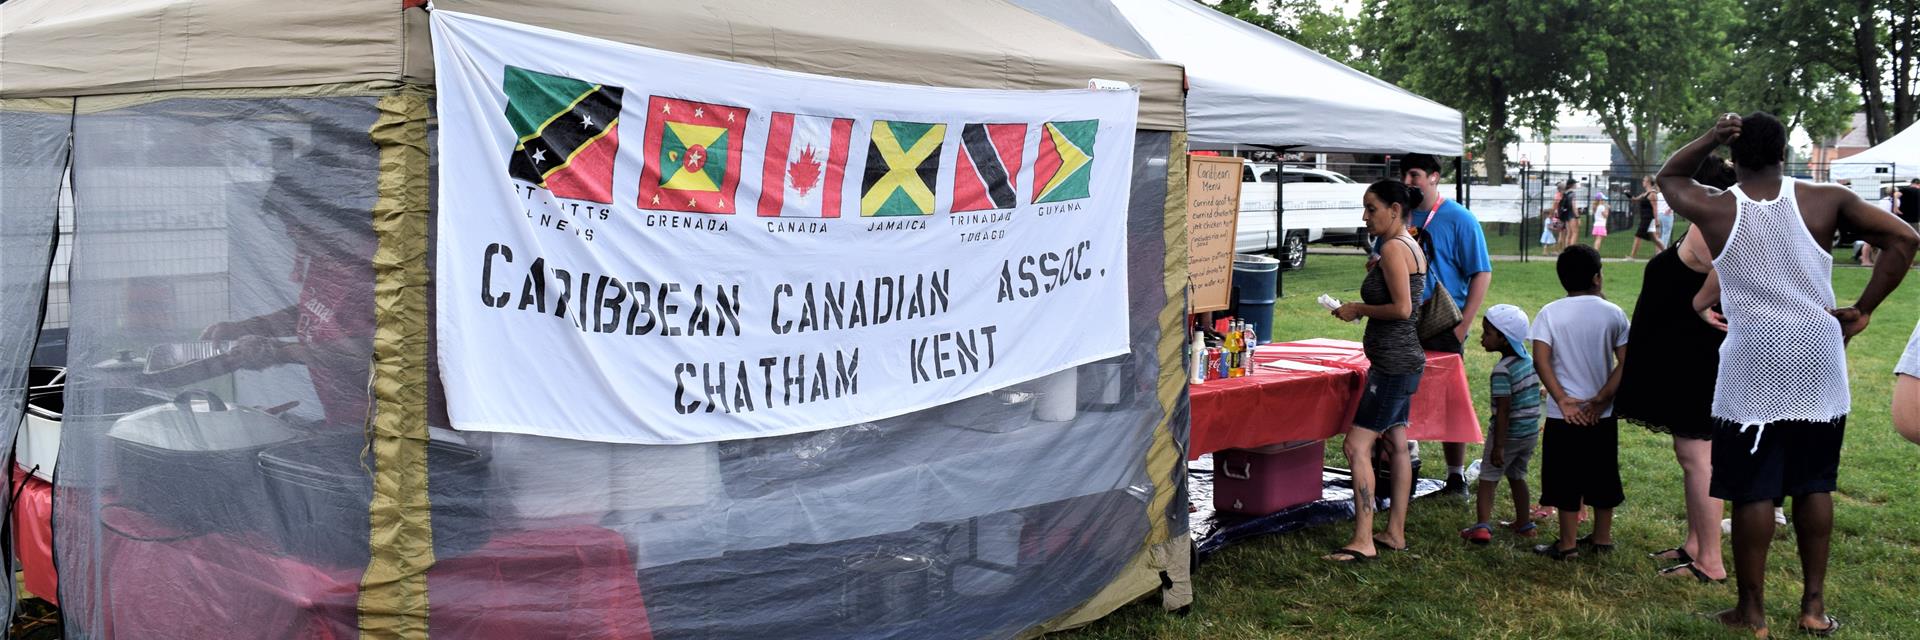 Caribbean Association of Chatham-Kent banner on a food booth.